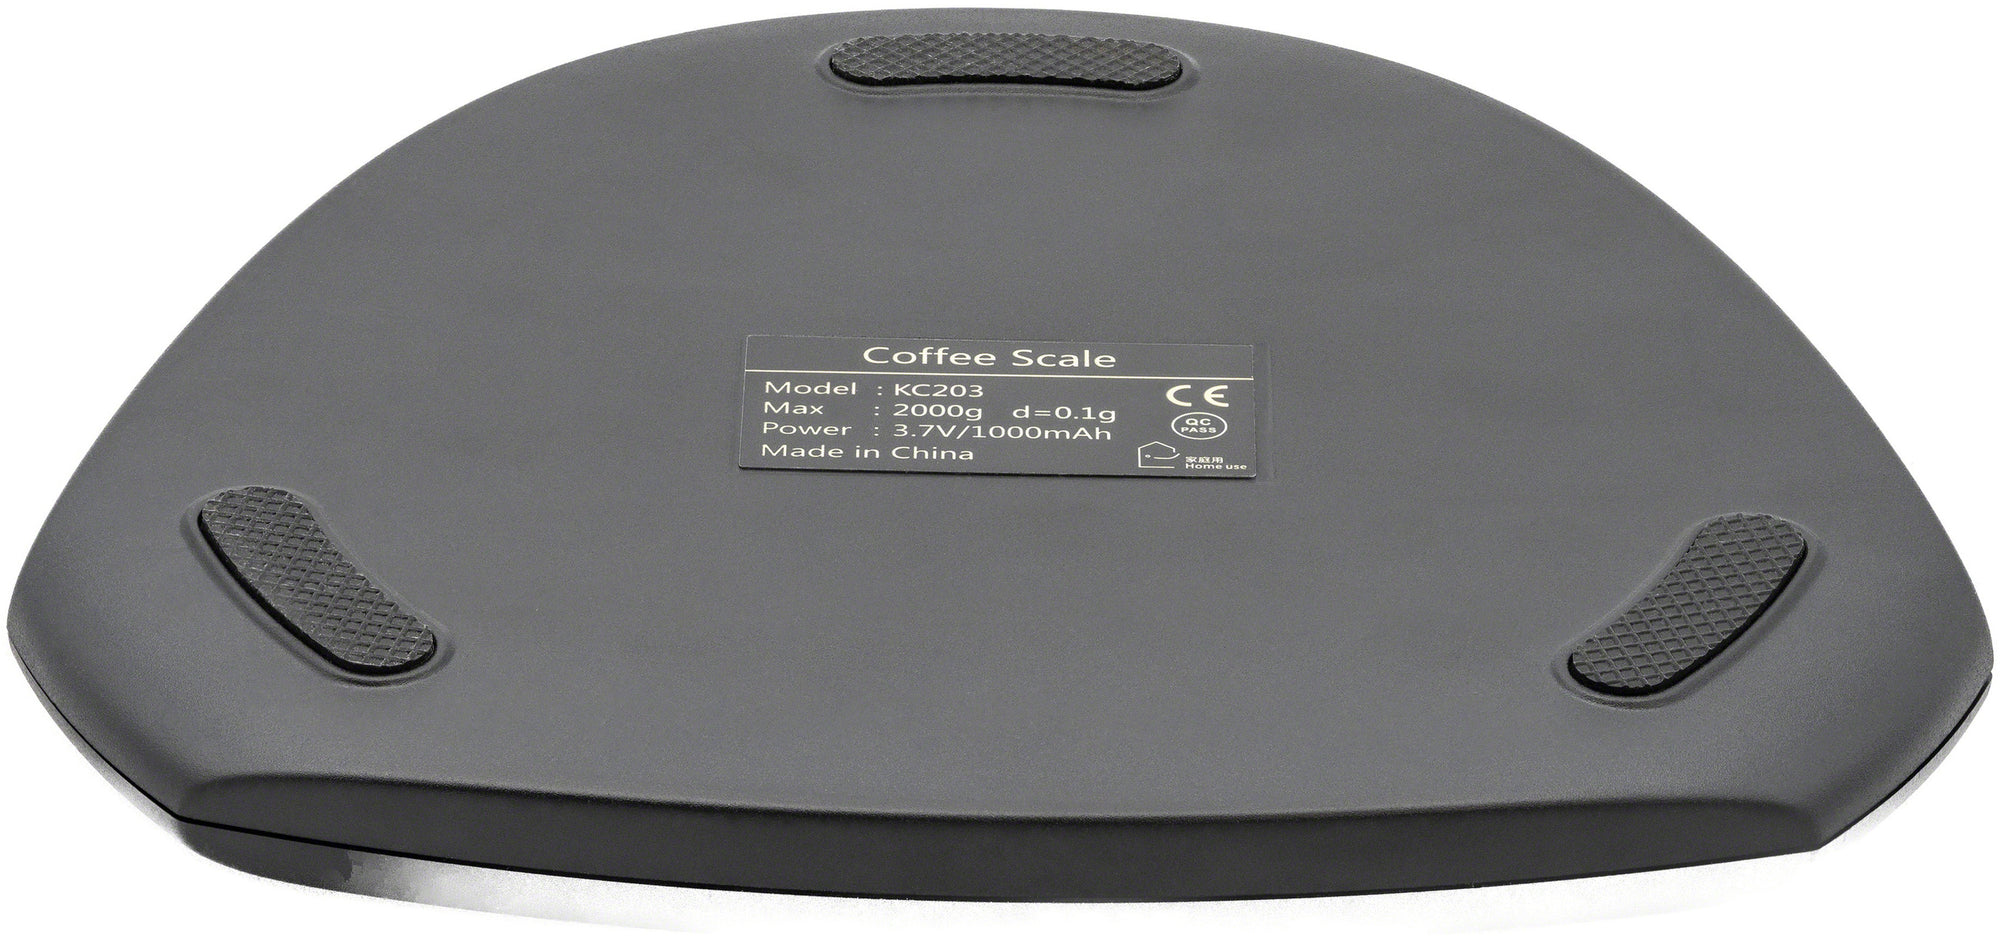 ✓Best Coffee Scales of 2023 